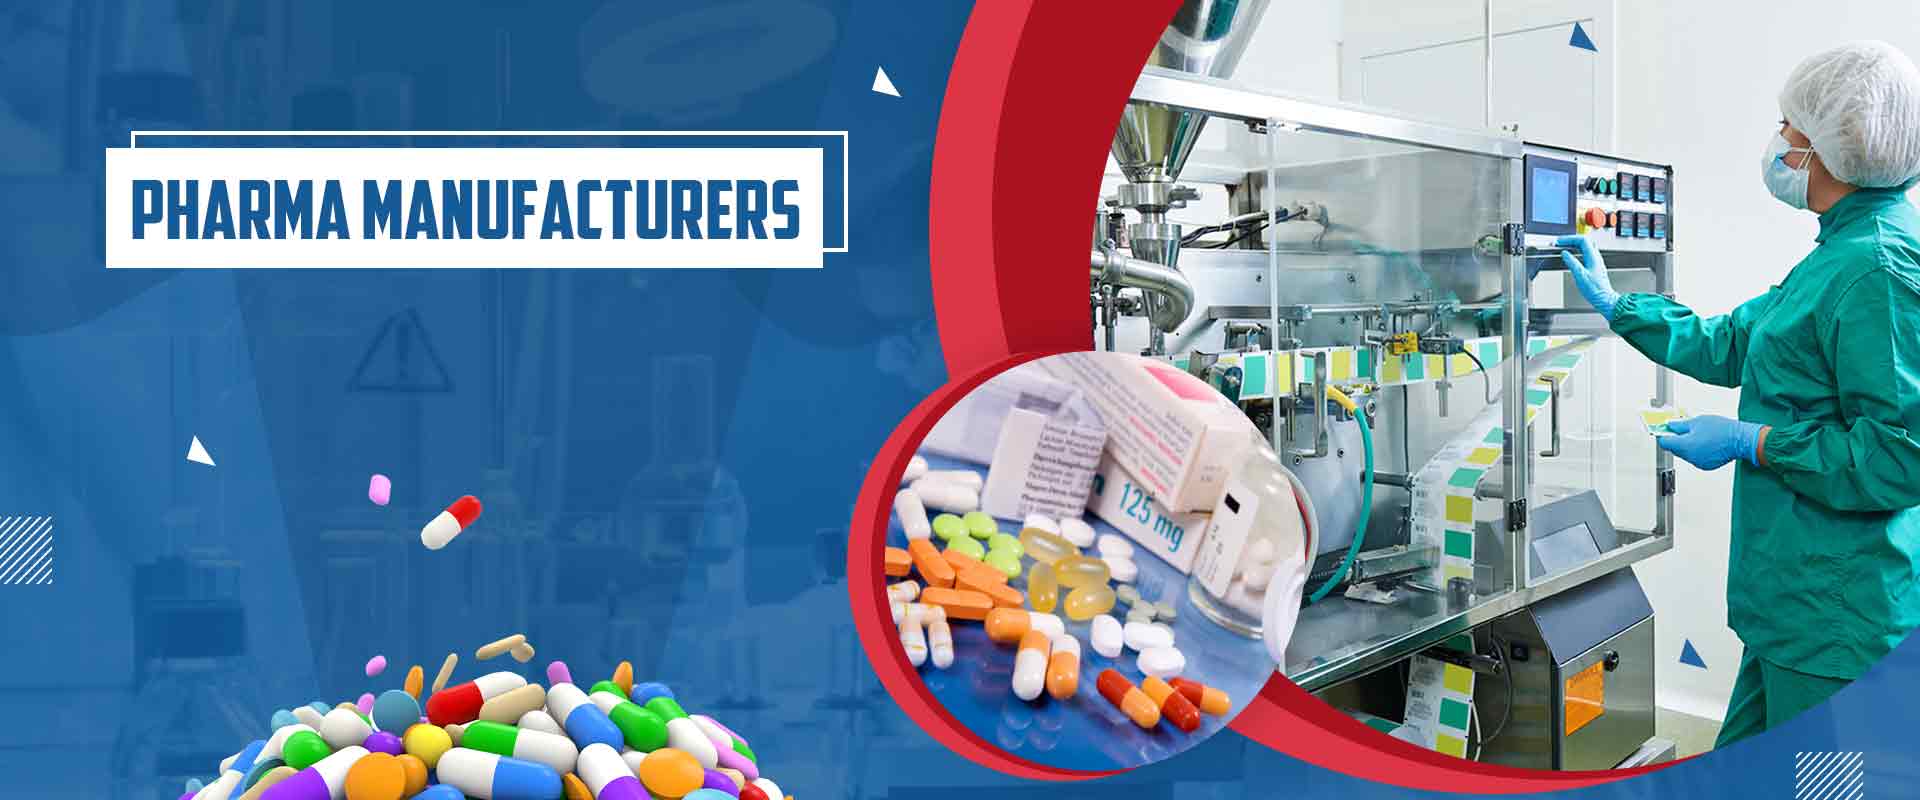 Third Party Manufacturing Pharma Company